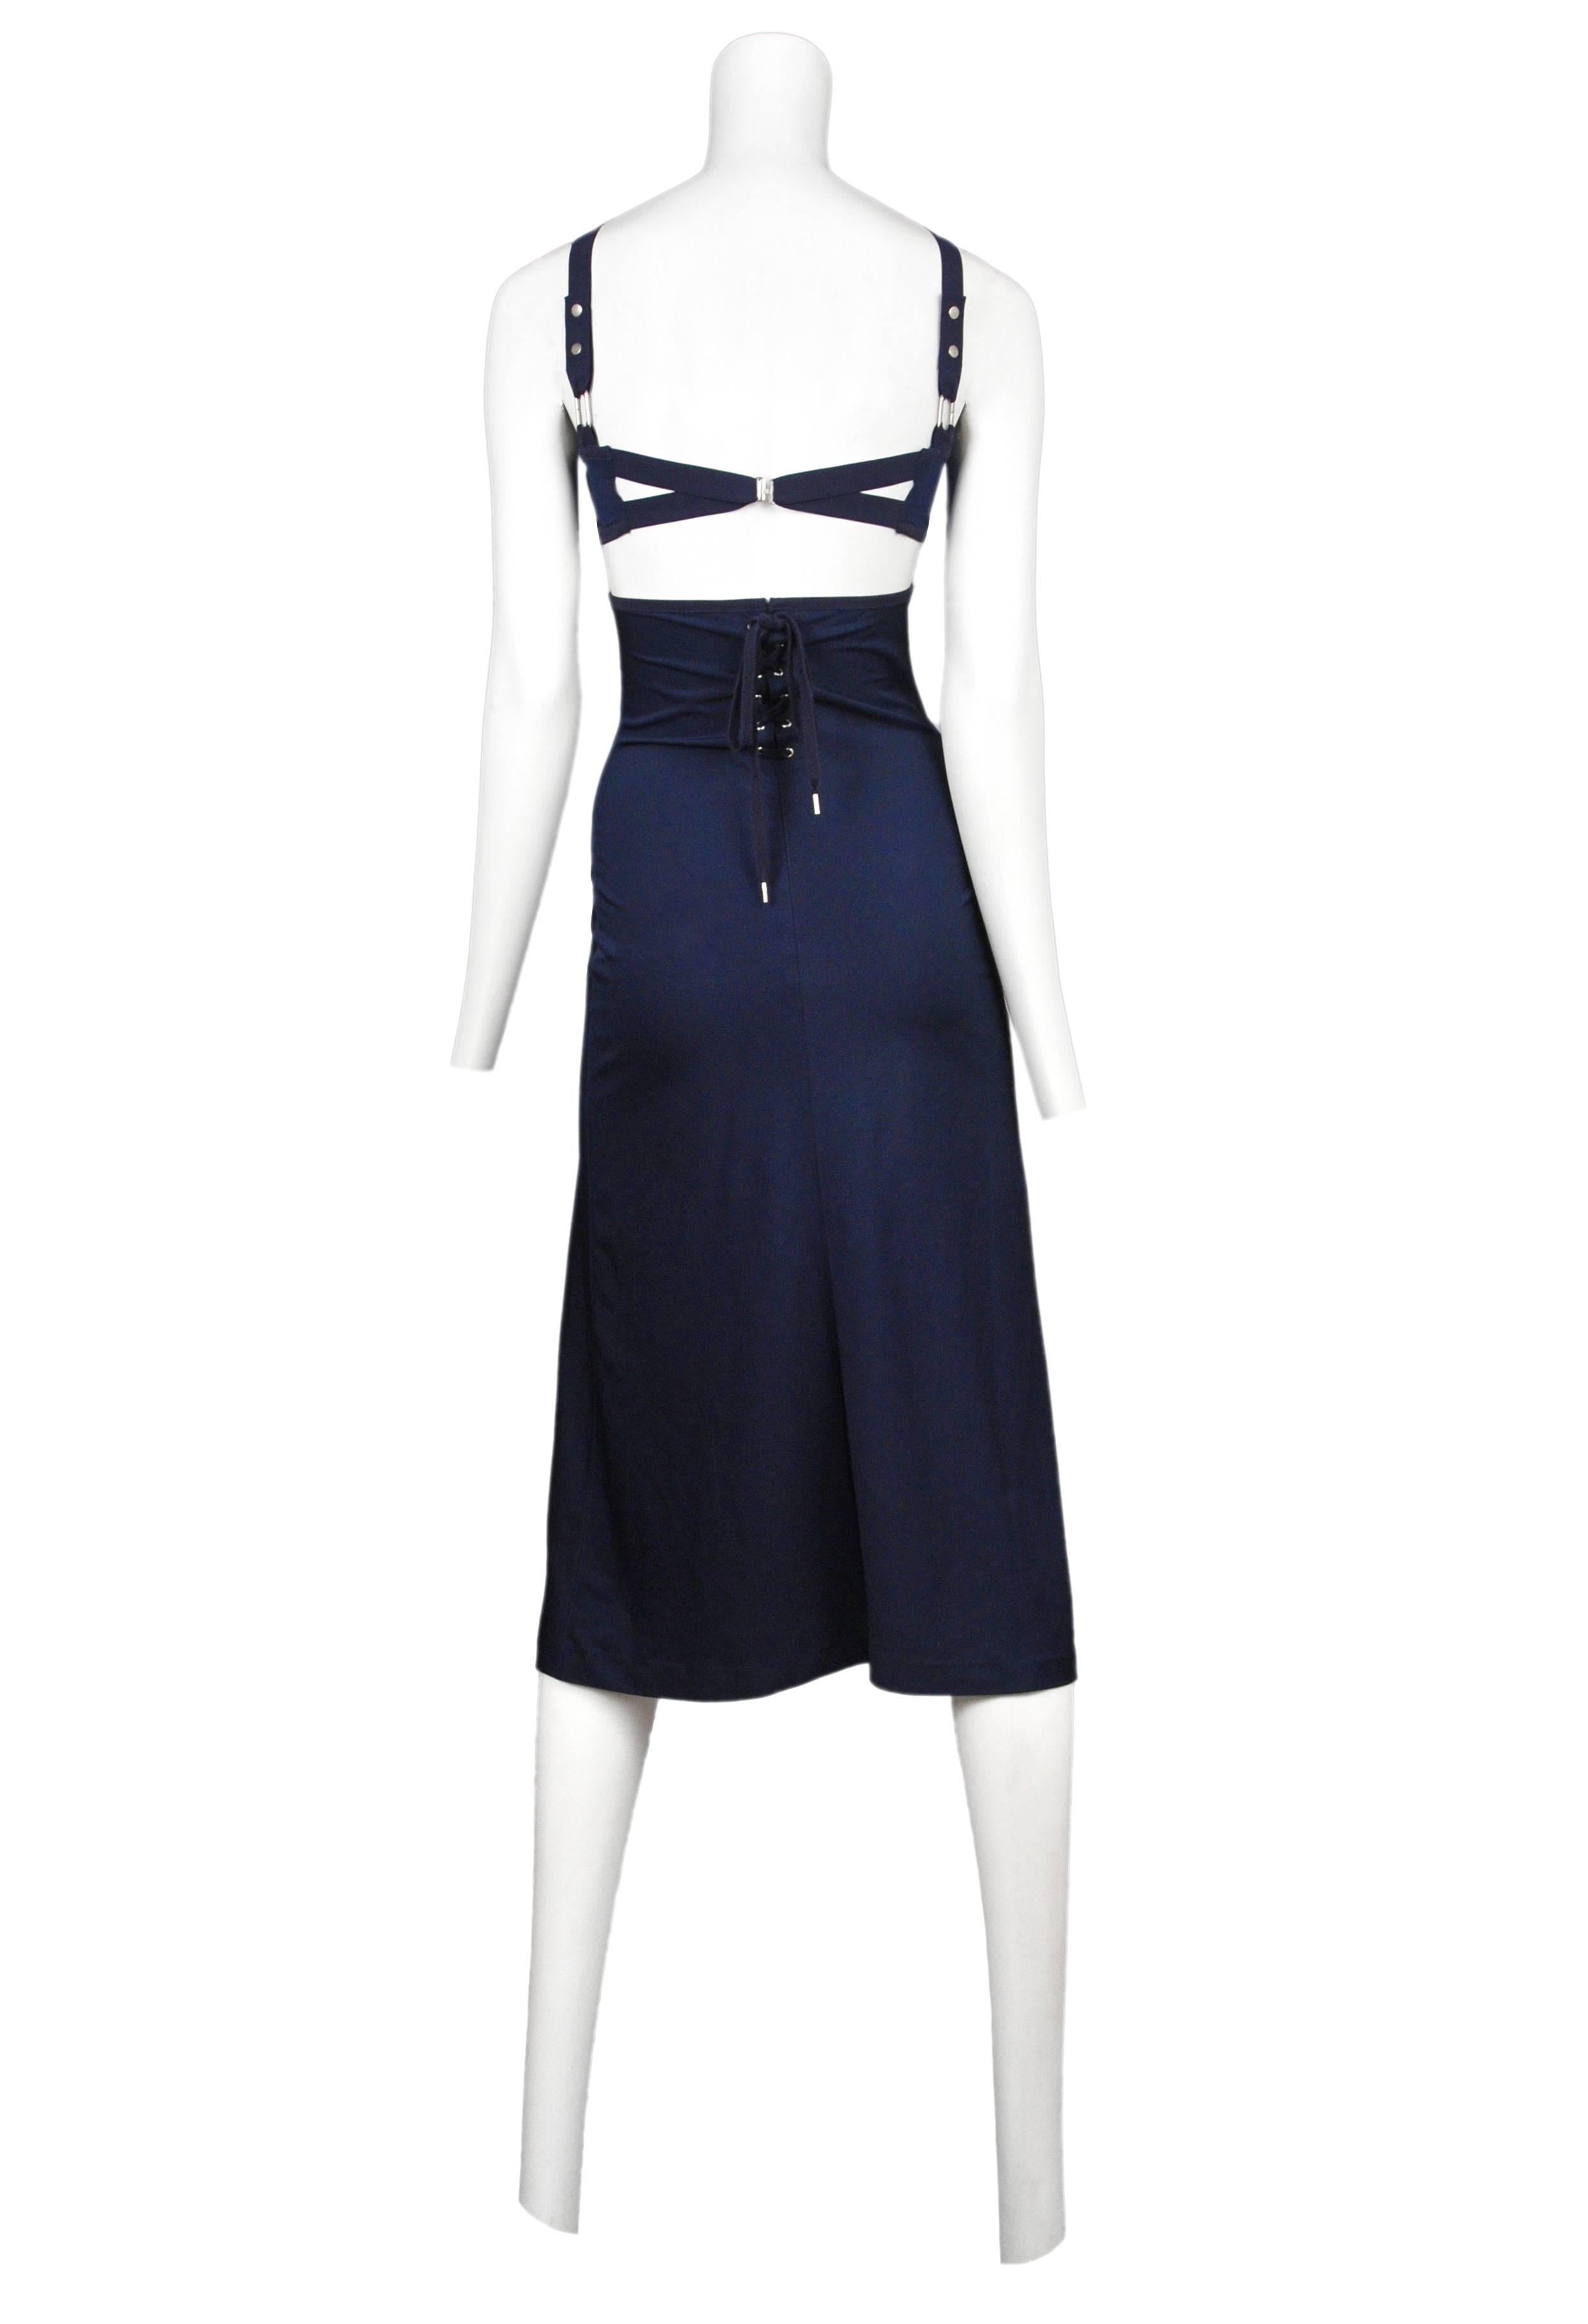 Gaultier navy jersey dress with bustier front with interesting strap detail and lace up back. Circa 1992